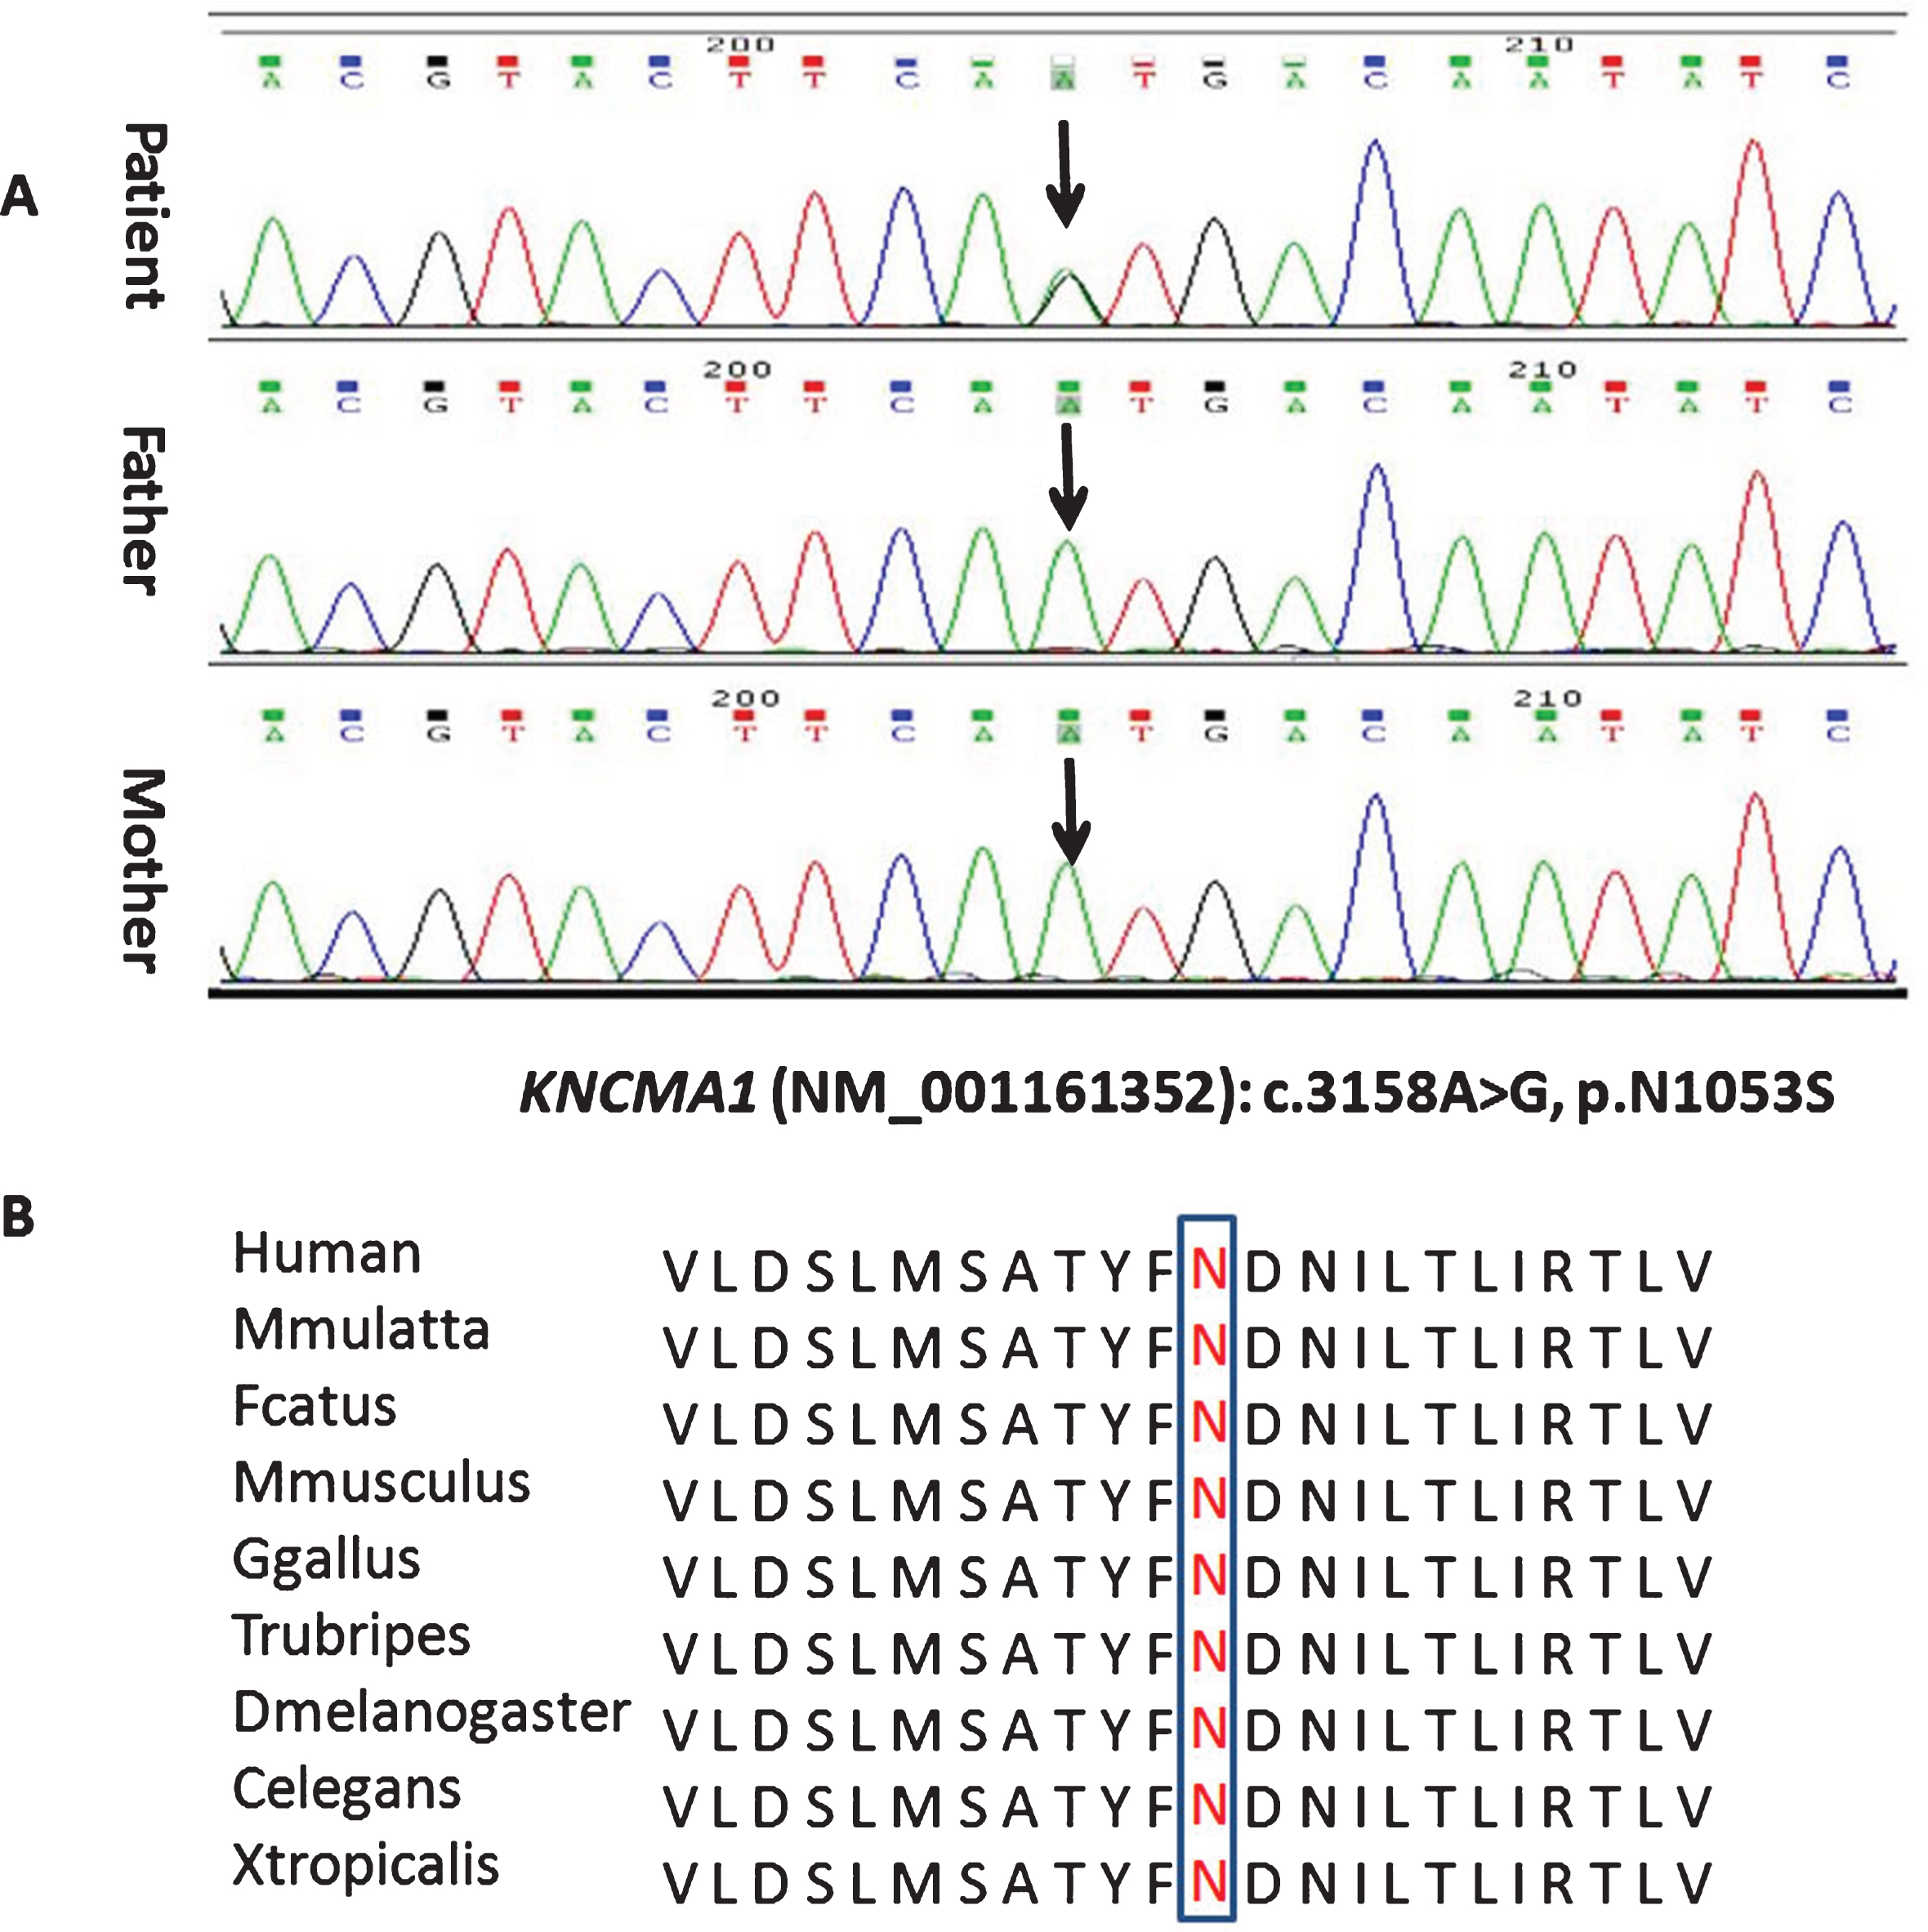 Sequence chromatogram showing one base pair substitution in KCNMA1 gene (A) and conservation of the altered amino acid shown in the ClustalW alignments (B).